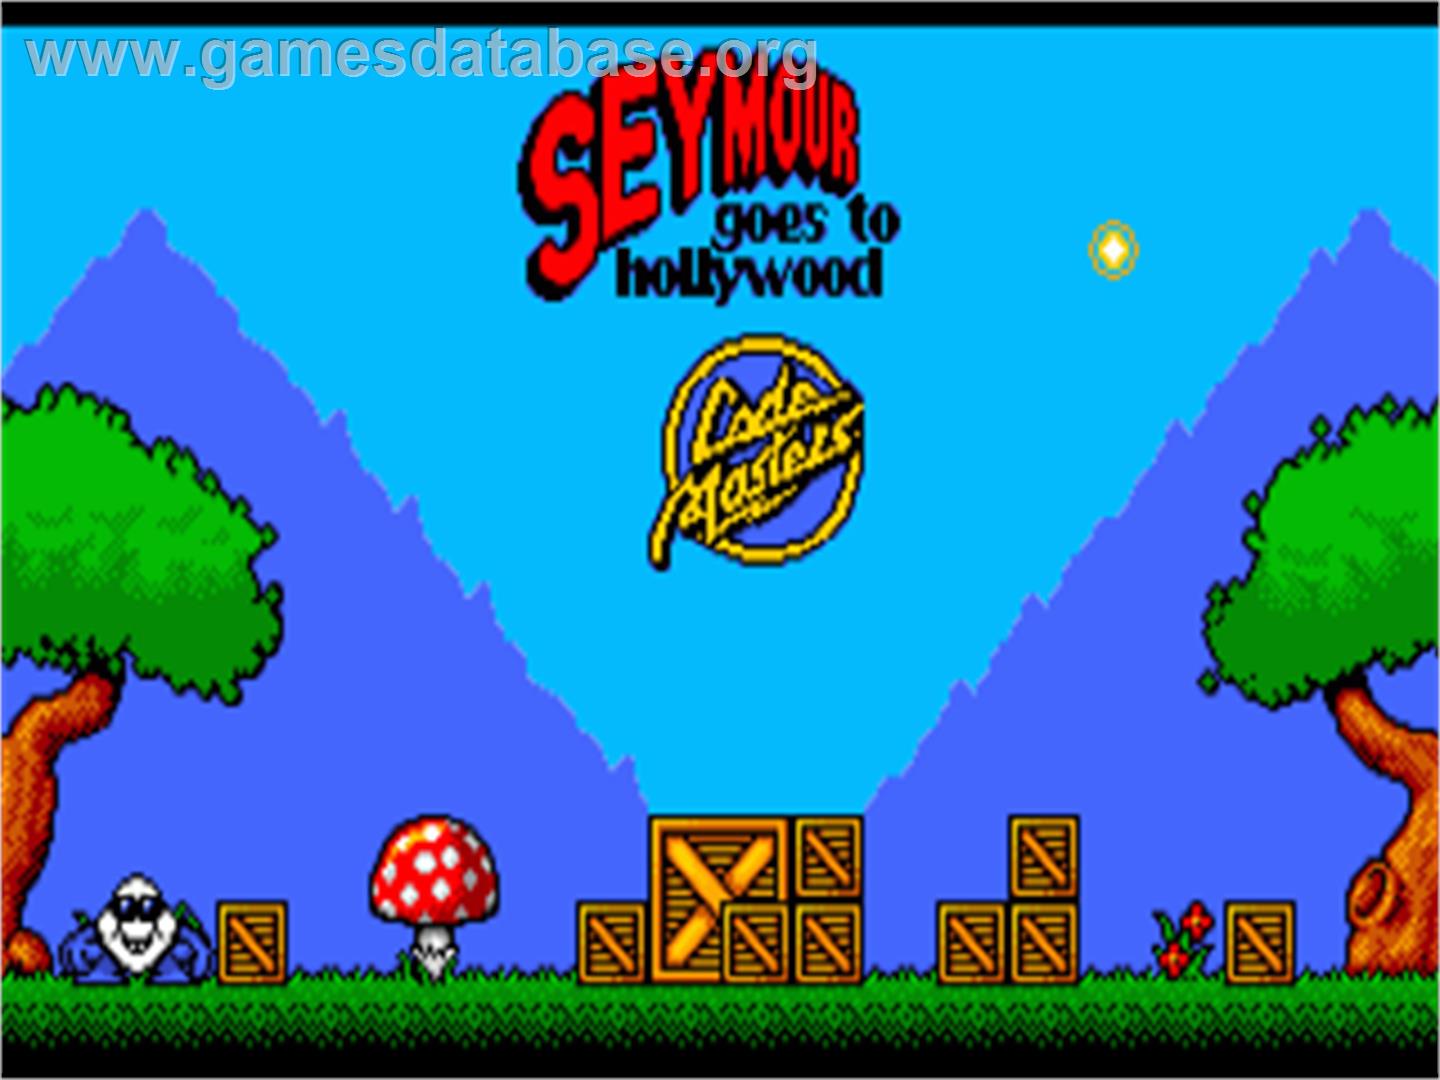 Seymour Goes to Hollywood - Commodore Amiga - Artwork - Title Screen